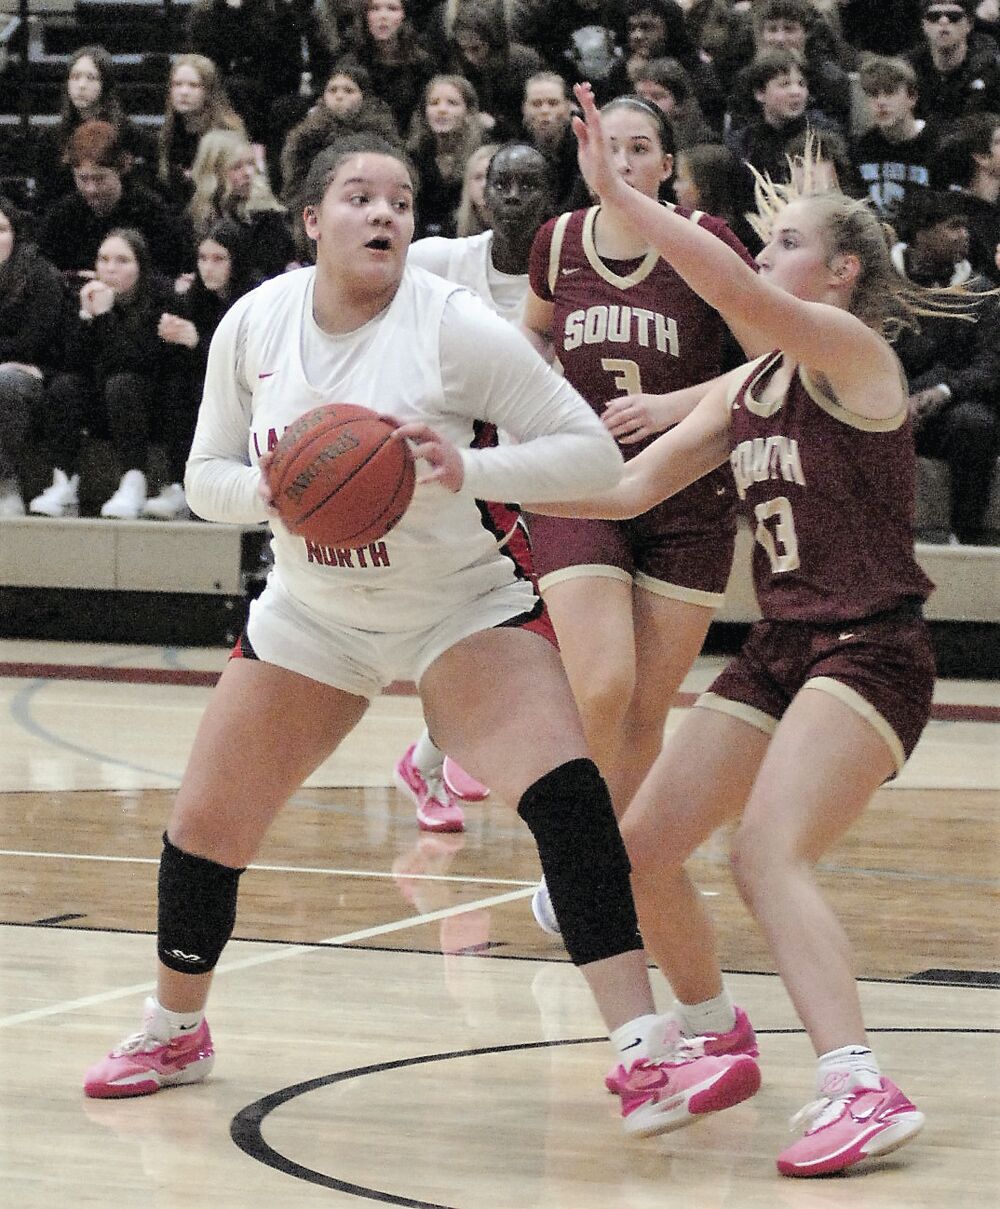 On rivalry night, North girls stay in control throughout